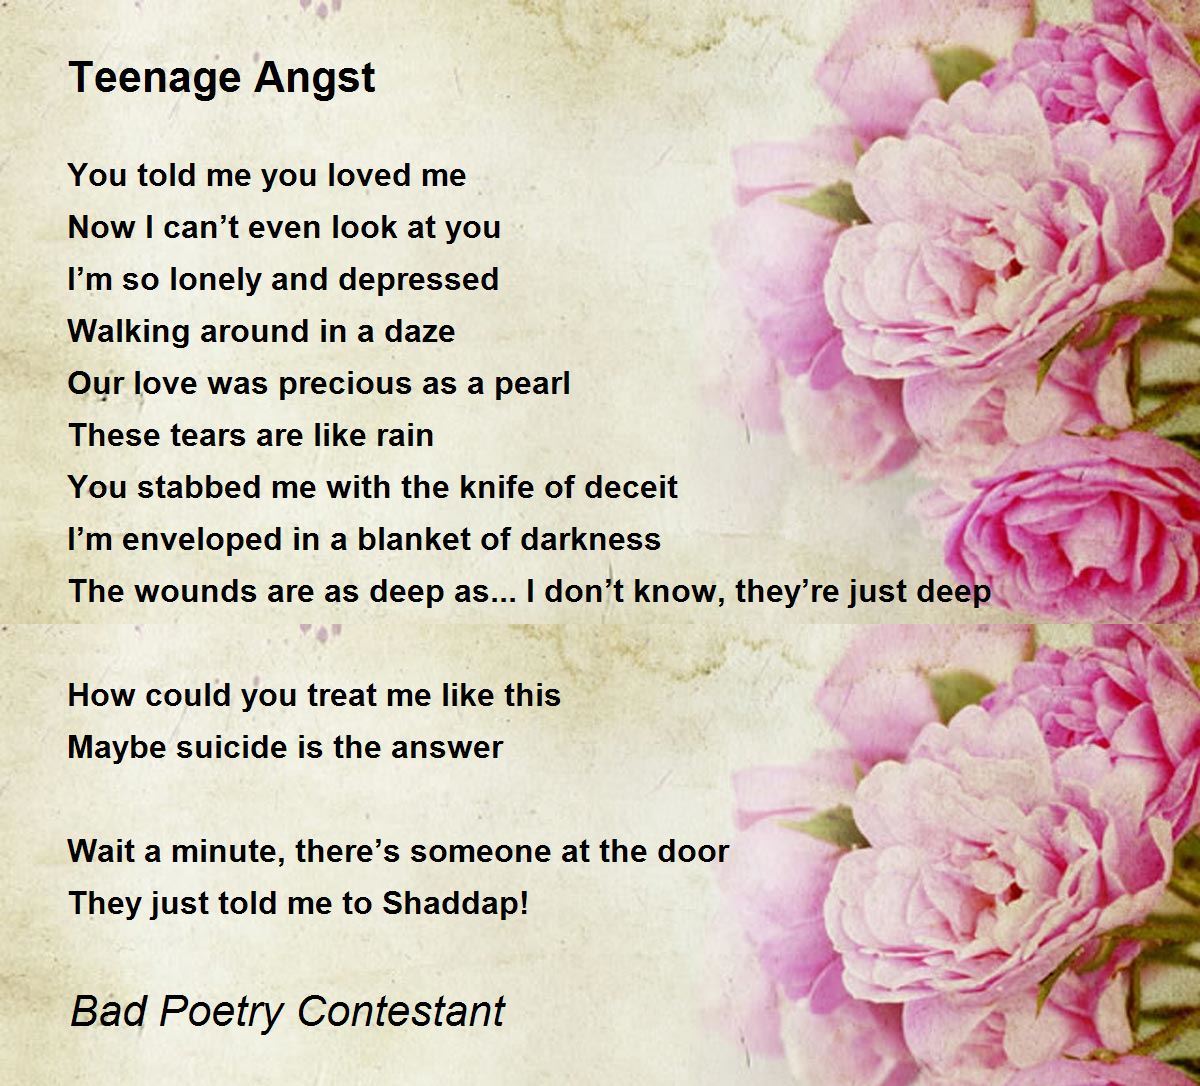 Teenage Angst poem summary, analysis and comments. 